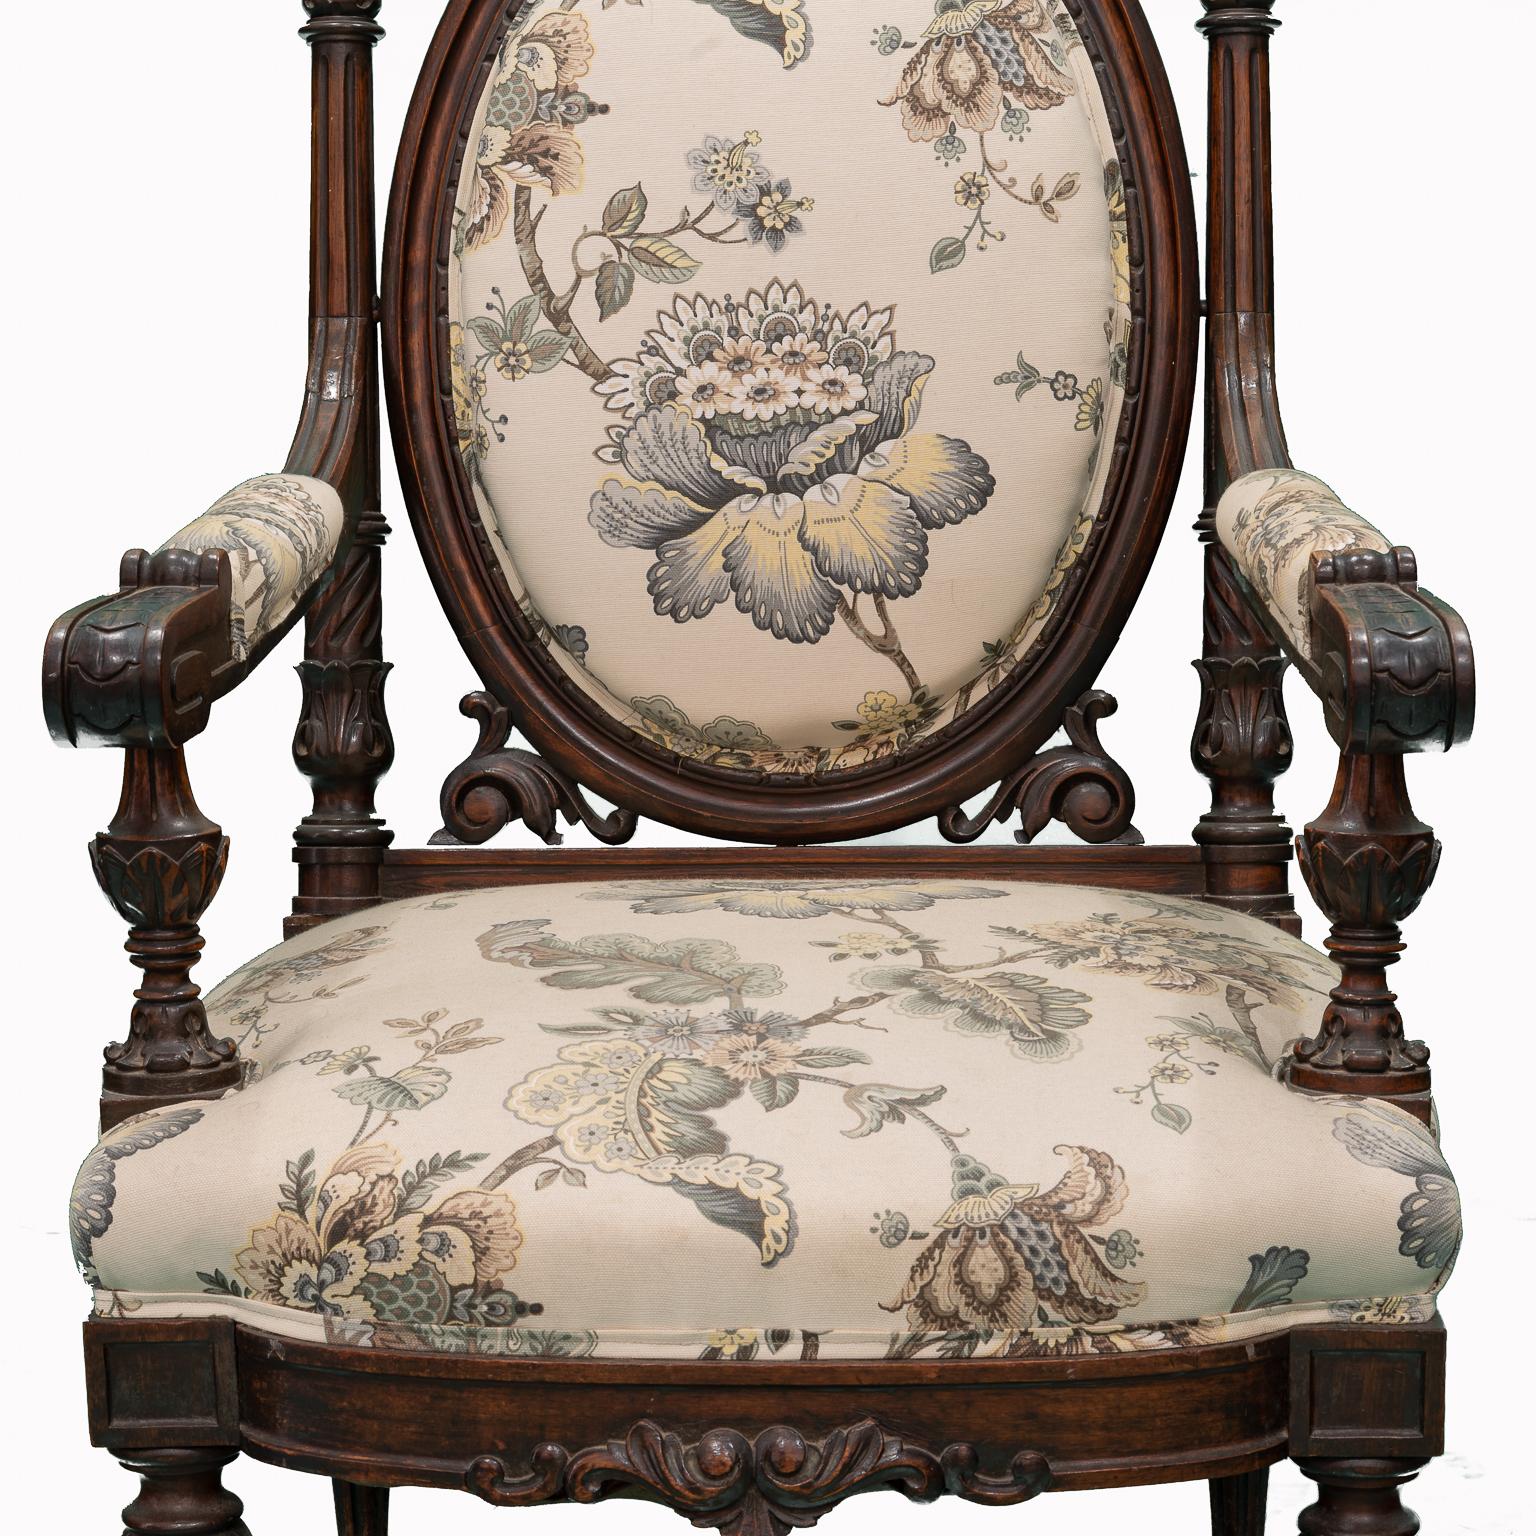 19th century flowered armchair, with vintage tapestry
in perfect conditions of conservation.